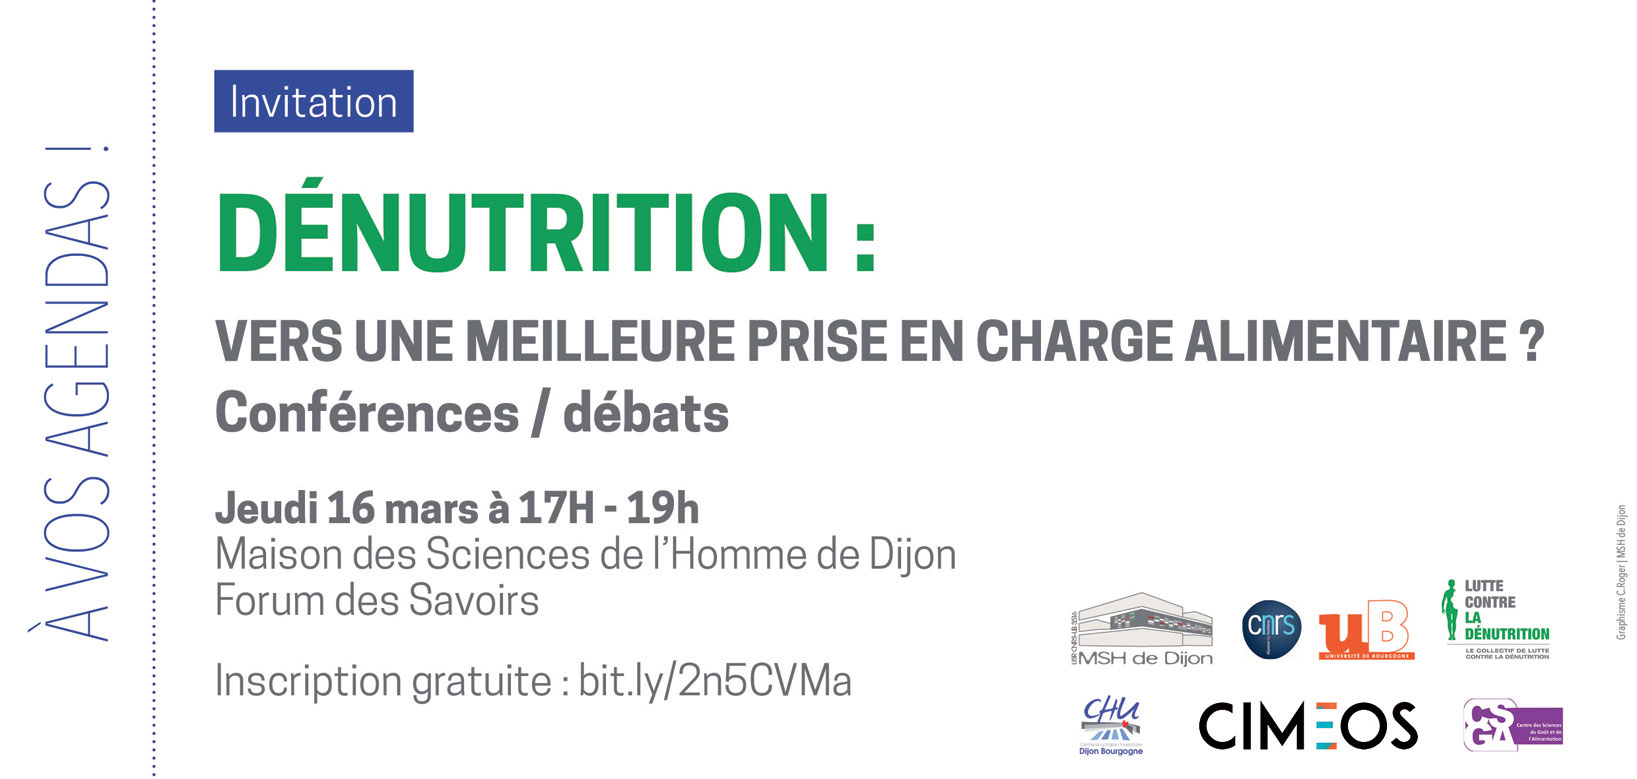 Save the date denutrition 210x100 mars17 2